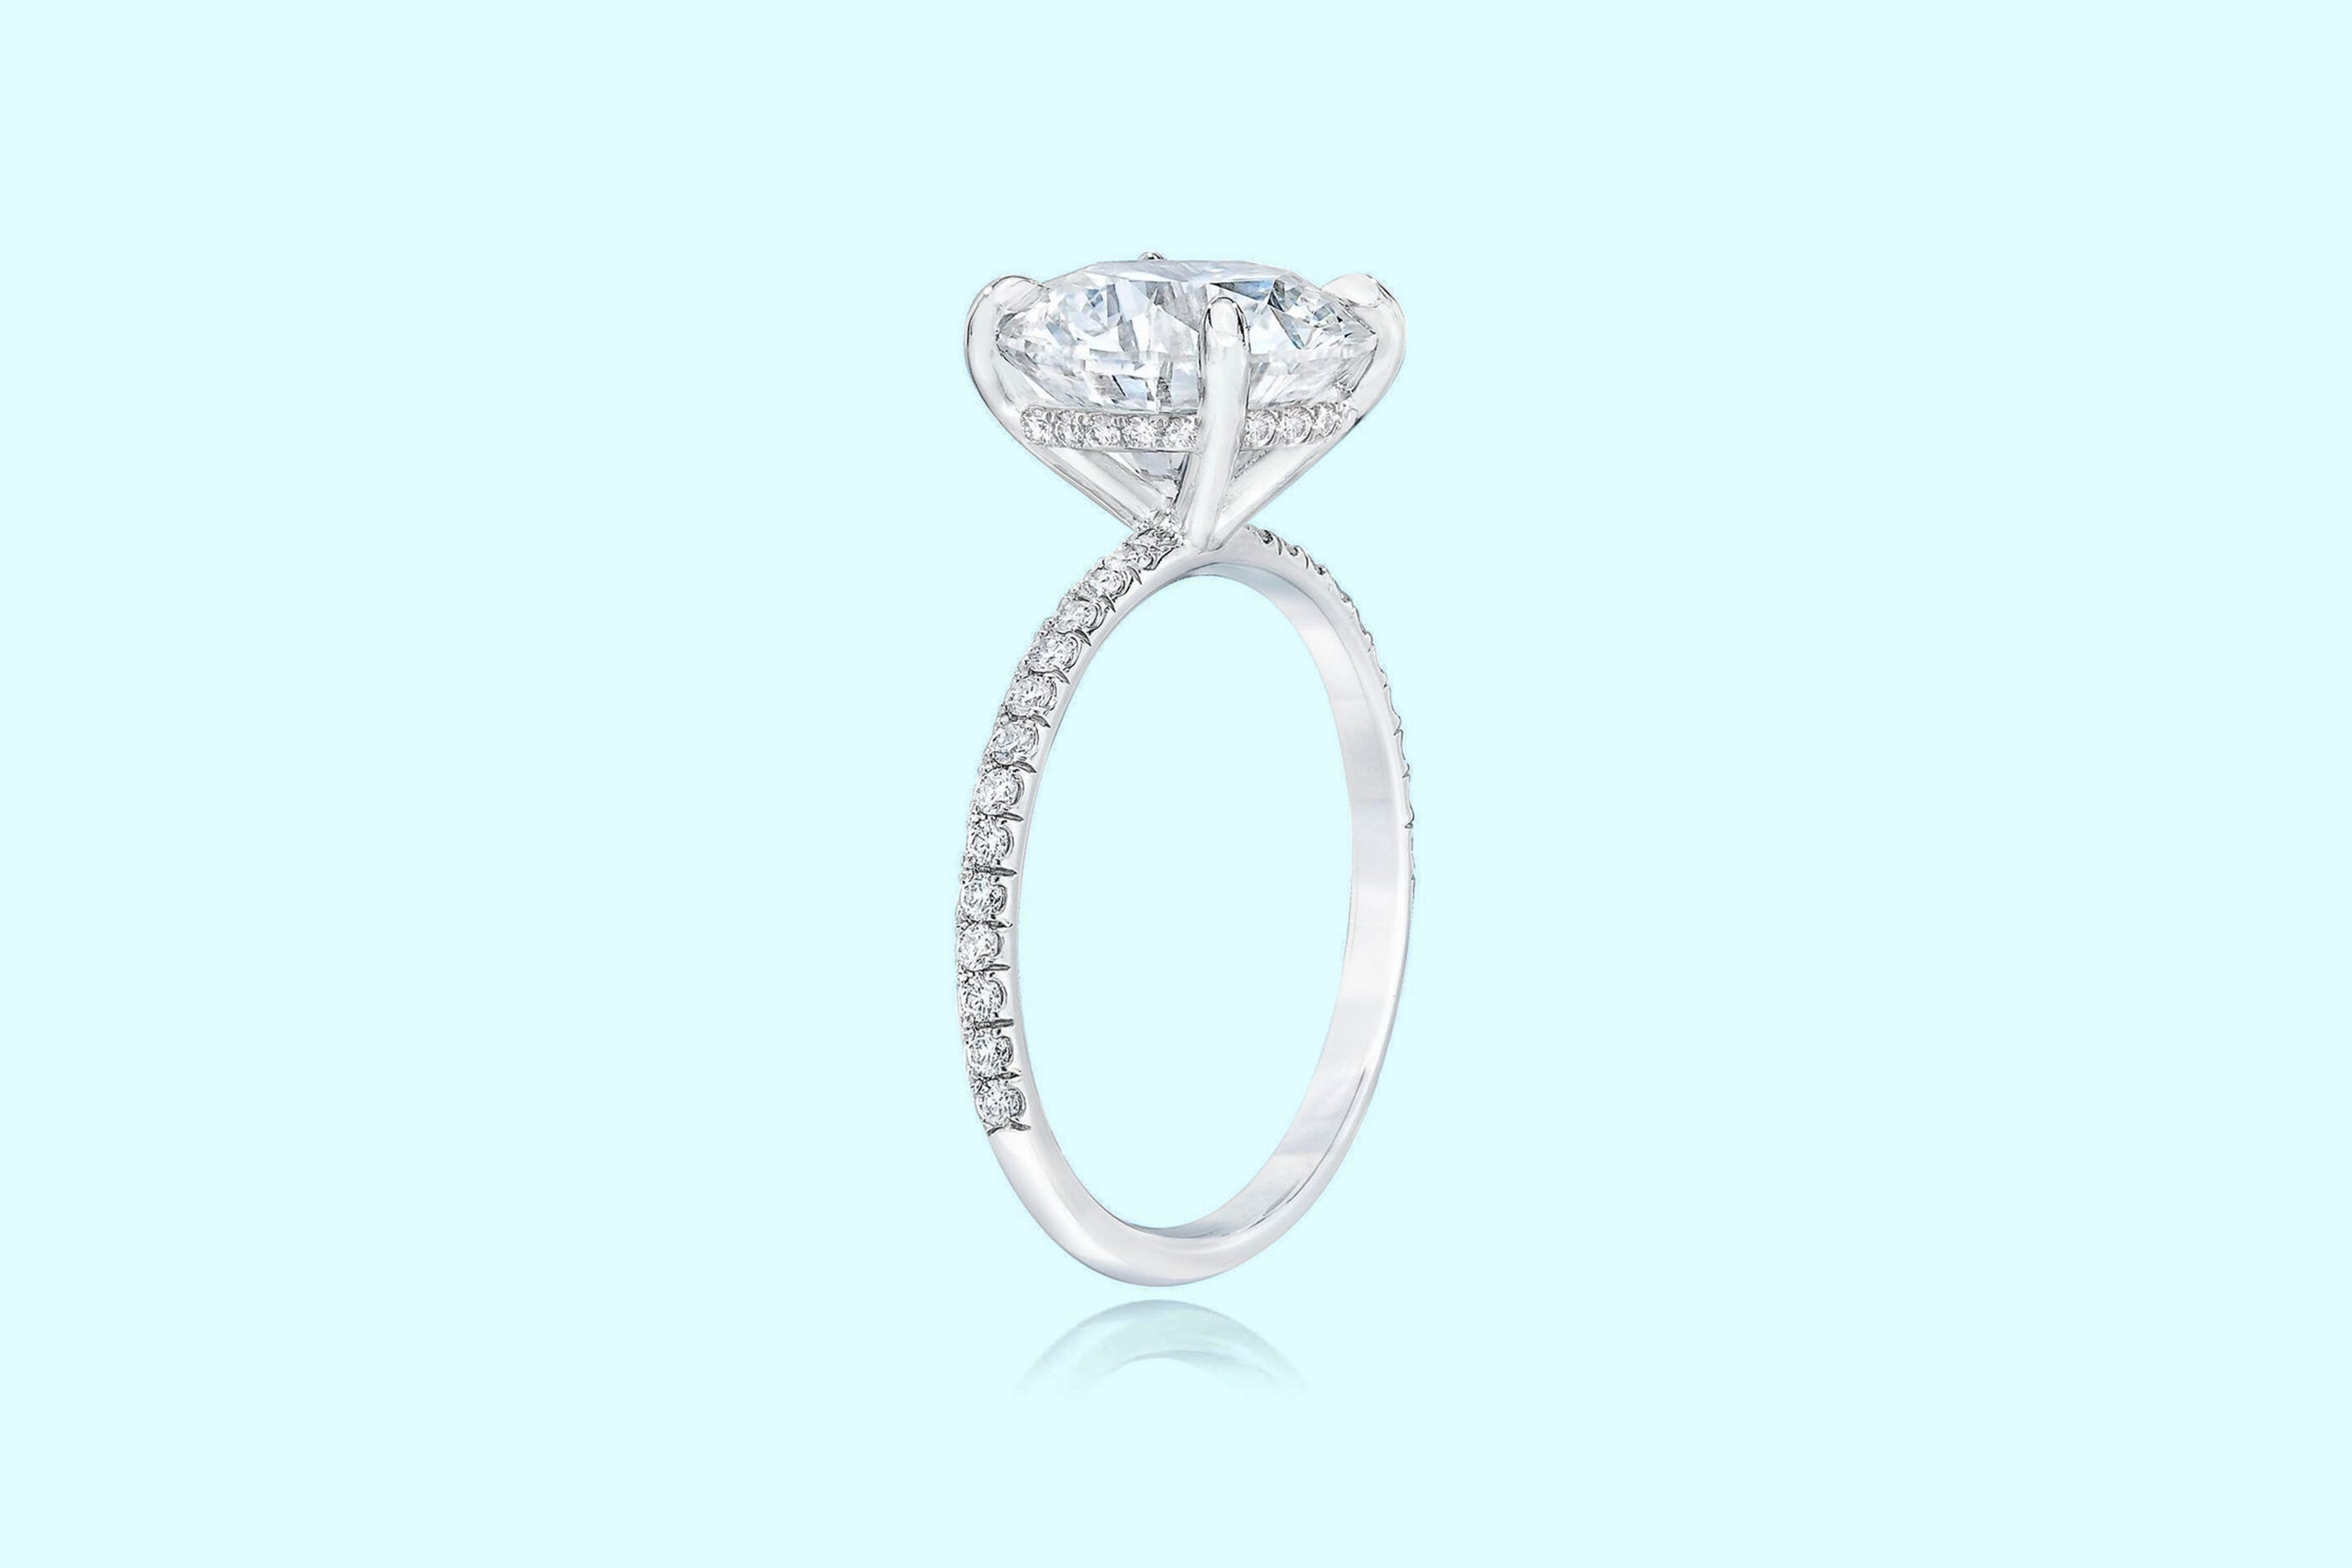 How to Buy an Engagement Ring: The Complete Guide